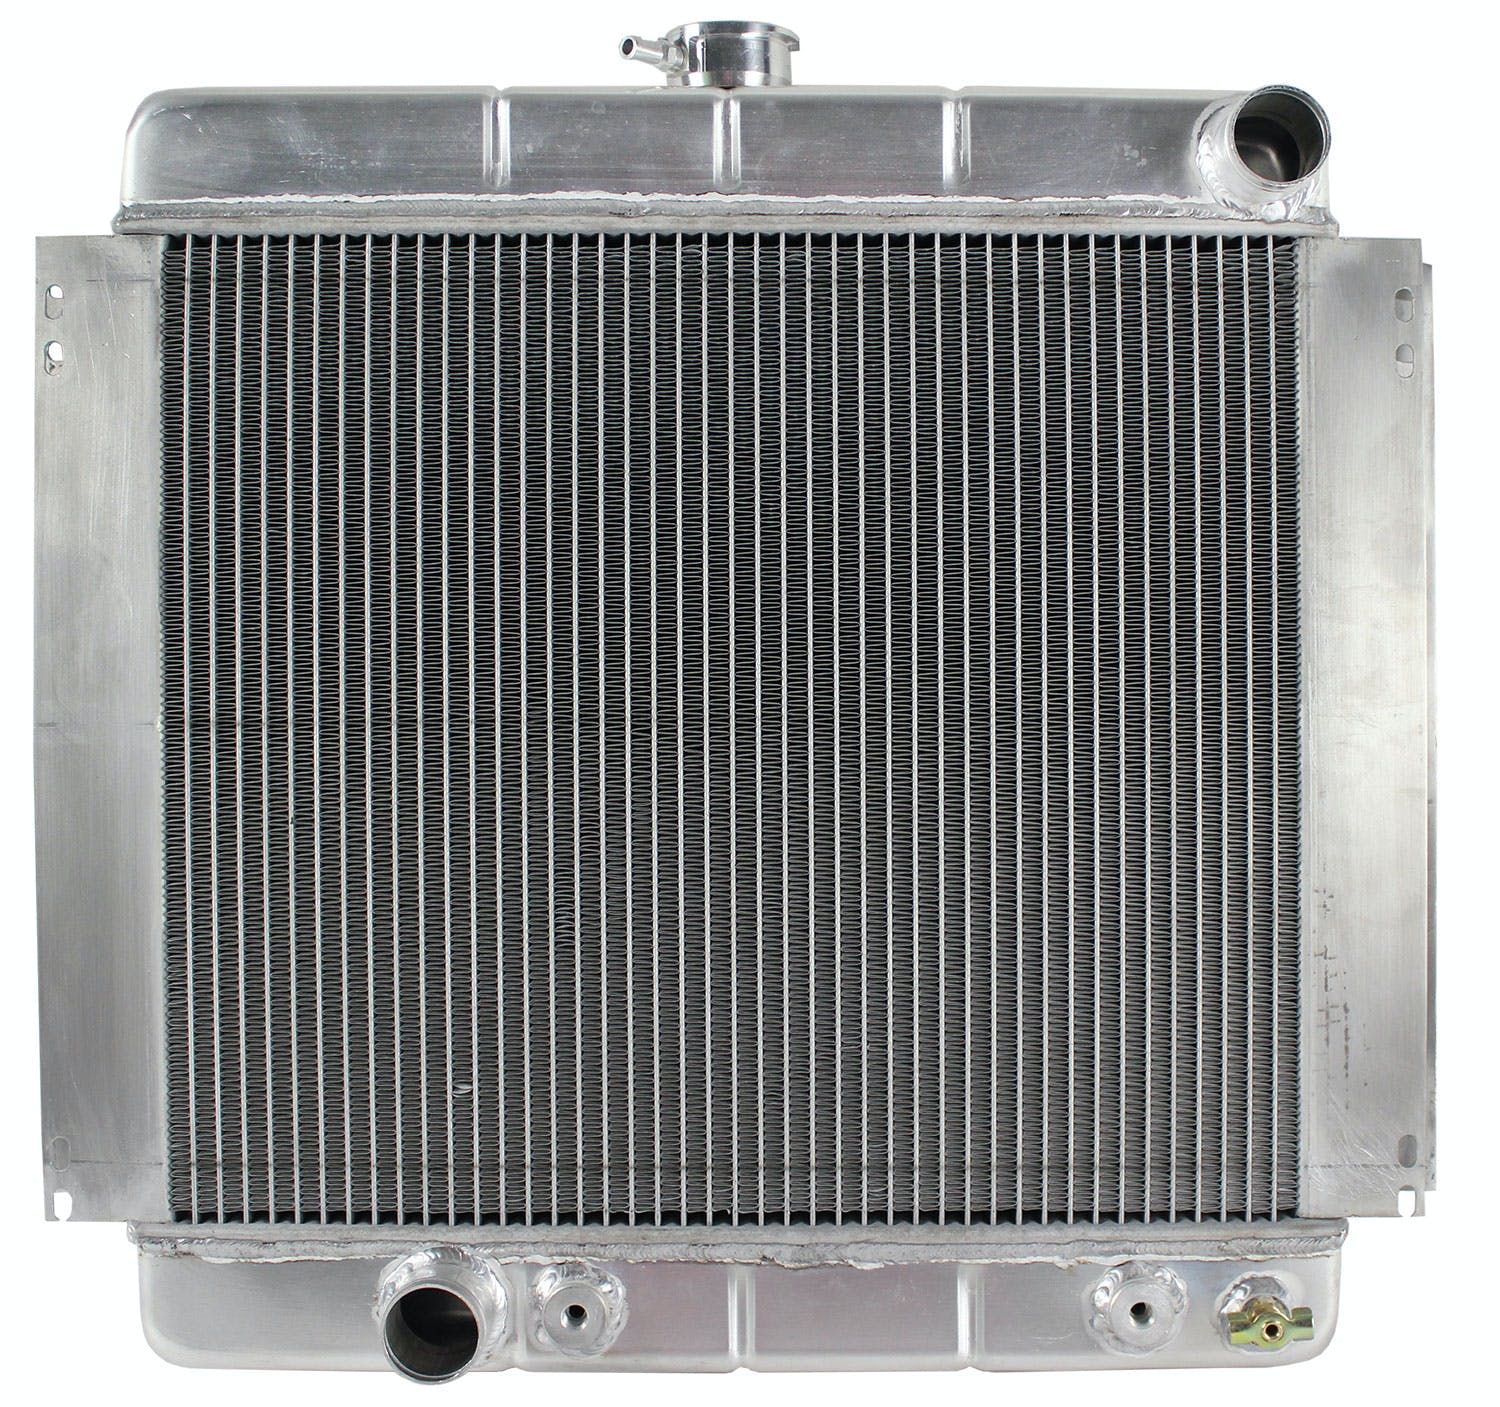 Northern Radiator 205213 Muscle Car Radiator - 19 3/4 x 21 7/8 x 2 1/2 - Outlet Driver Side